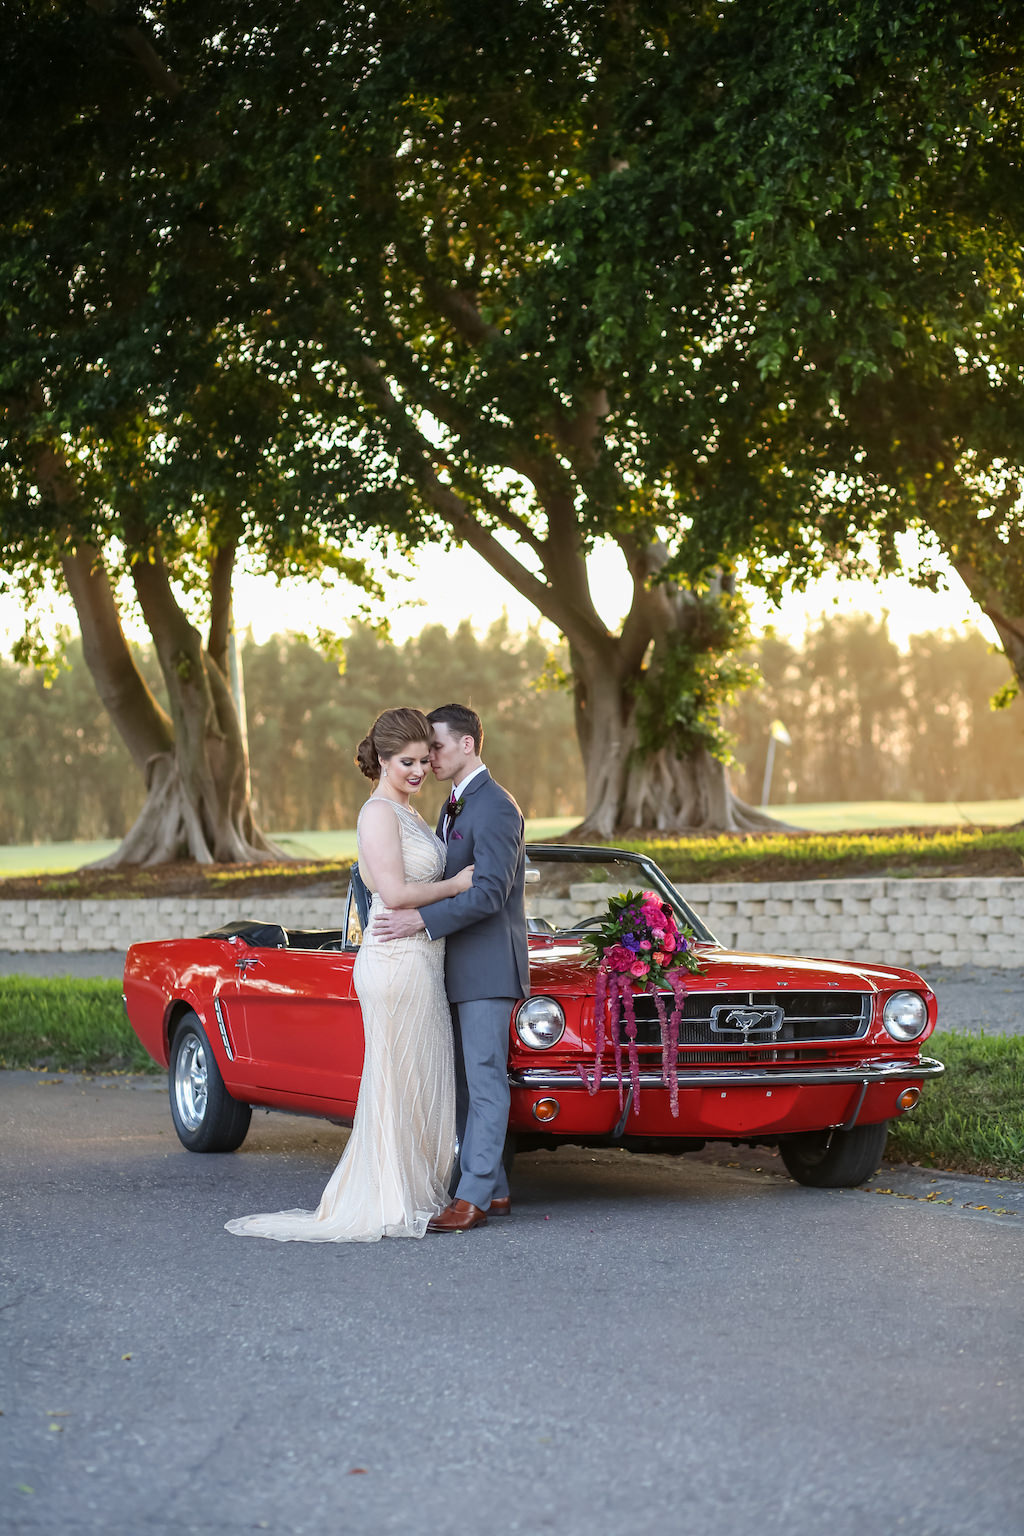 Bride and Groom Portrait with Pink, Fuchsia, Purple and Plum with Greenery Cascading Wedding Bouquet on Red Vintage Mustang Classic Car | Tampa Bay Wedding Florist Gabro Event Services | Planner Kelly Kennedy Weddings and Events | Photographer Lifelong Photography Studio